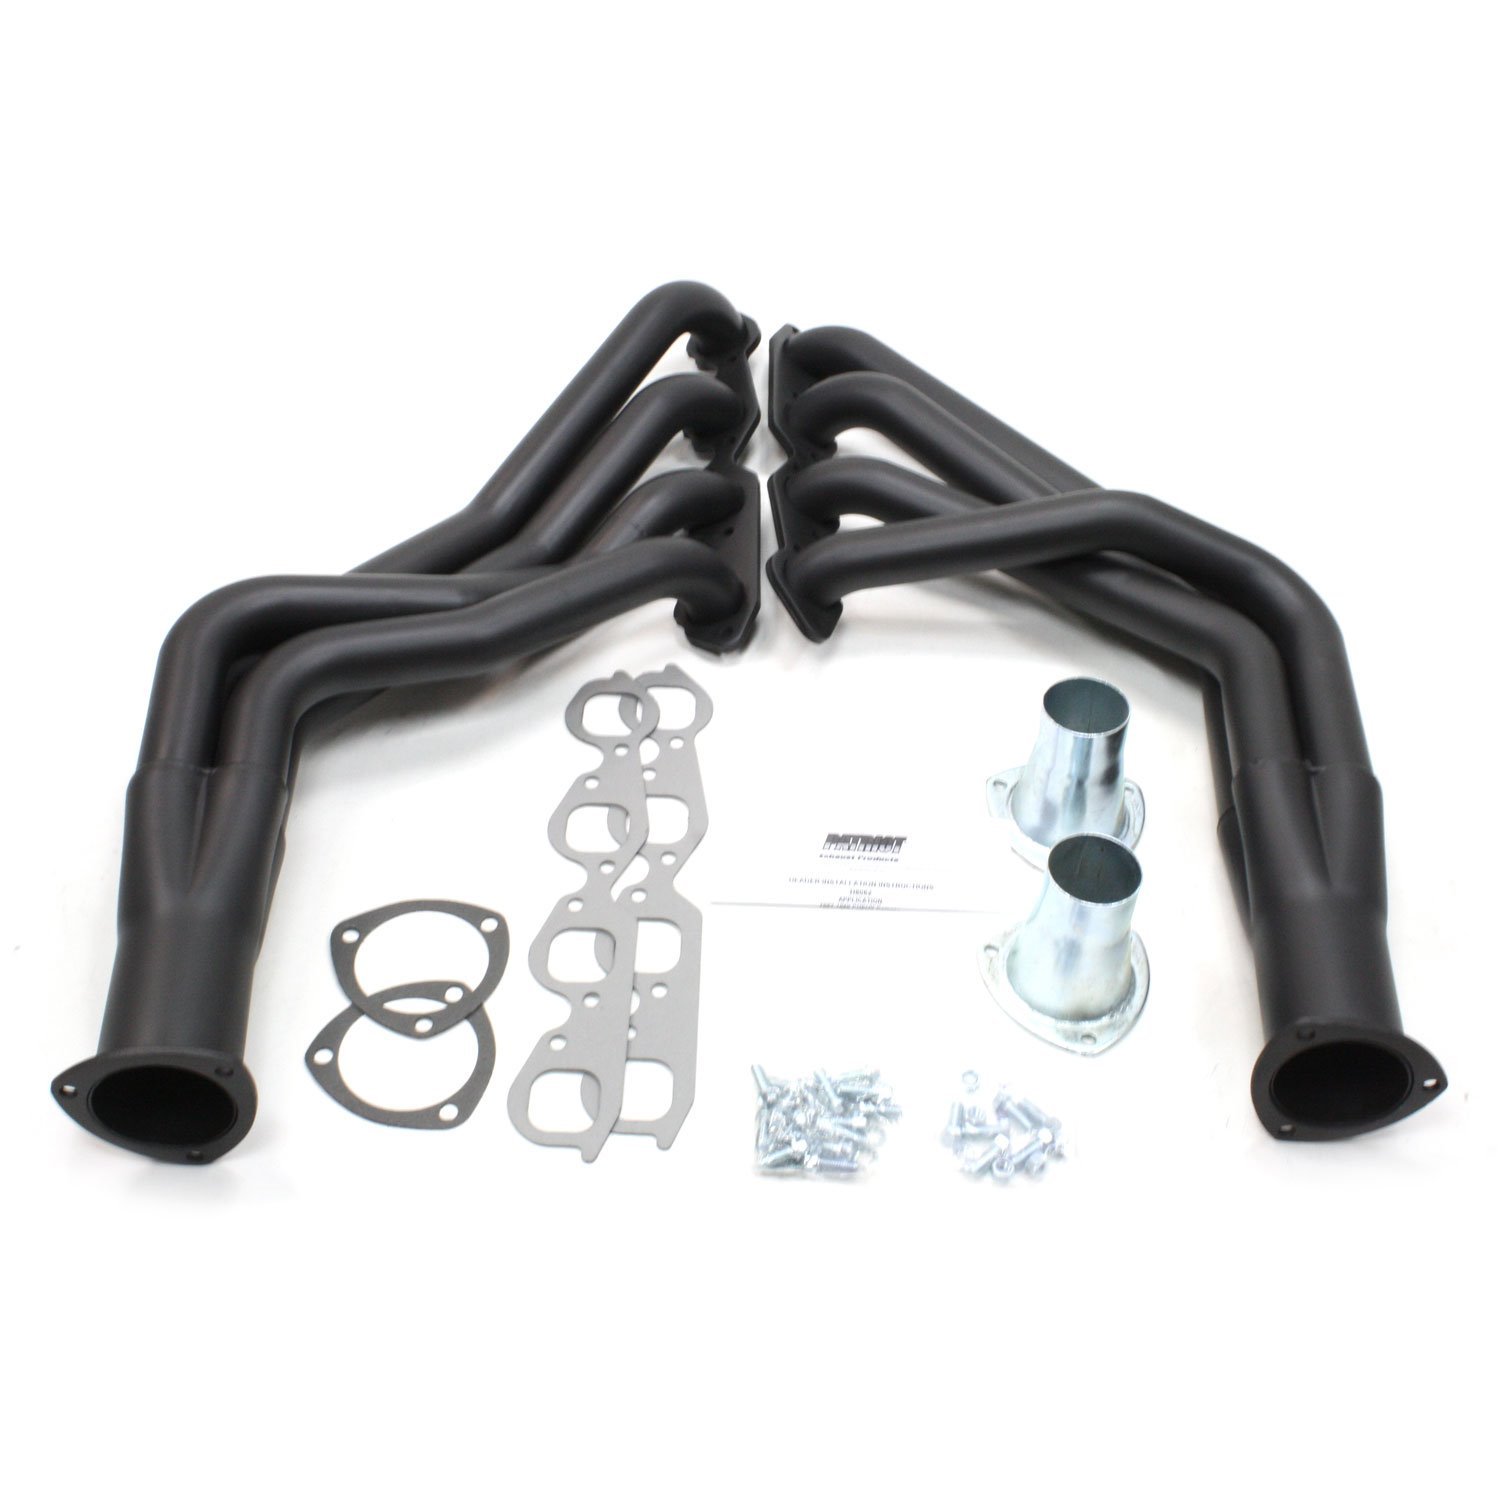 GM Specific Fit Headers 1965-1970 Full Size Passenger Car